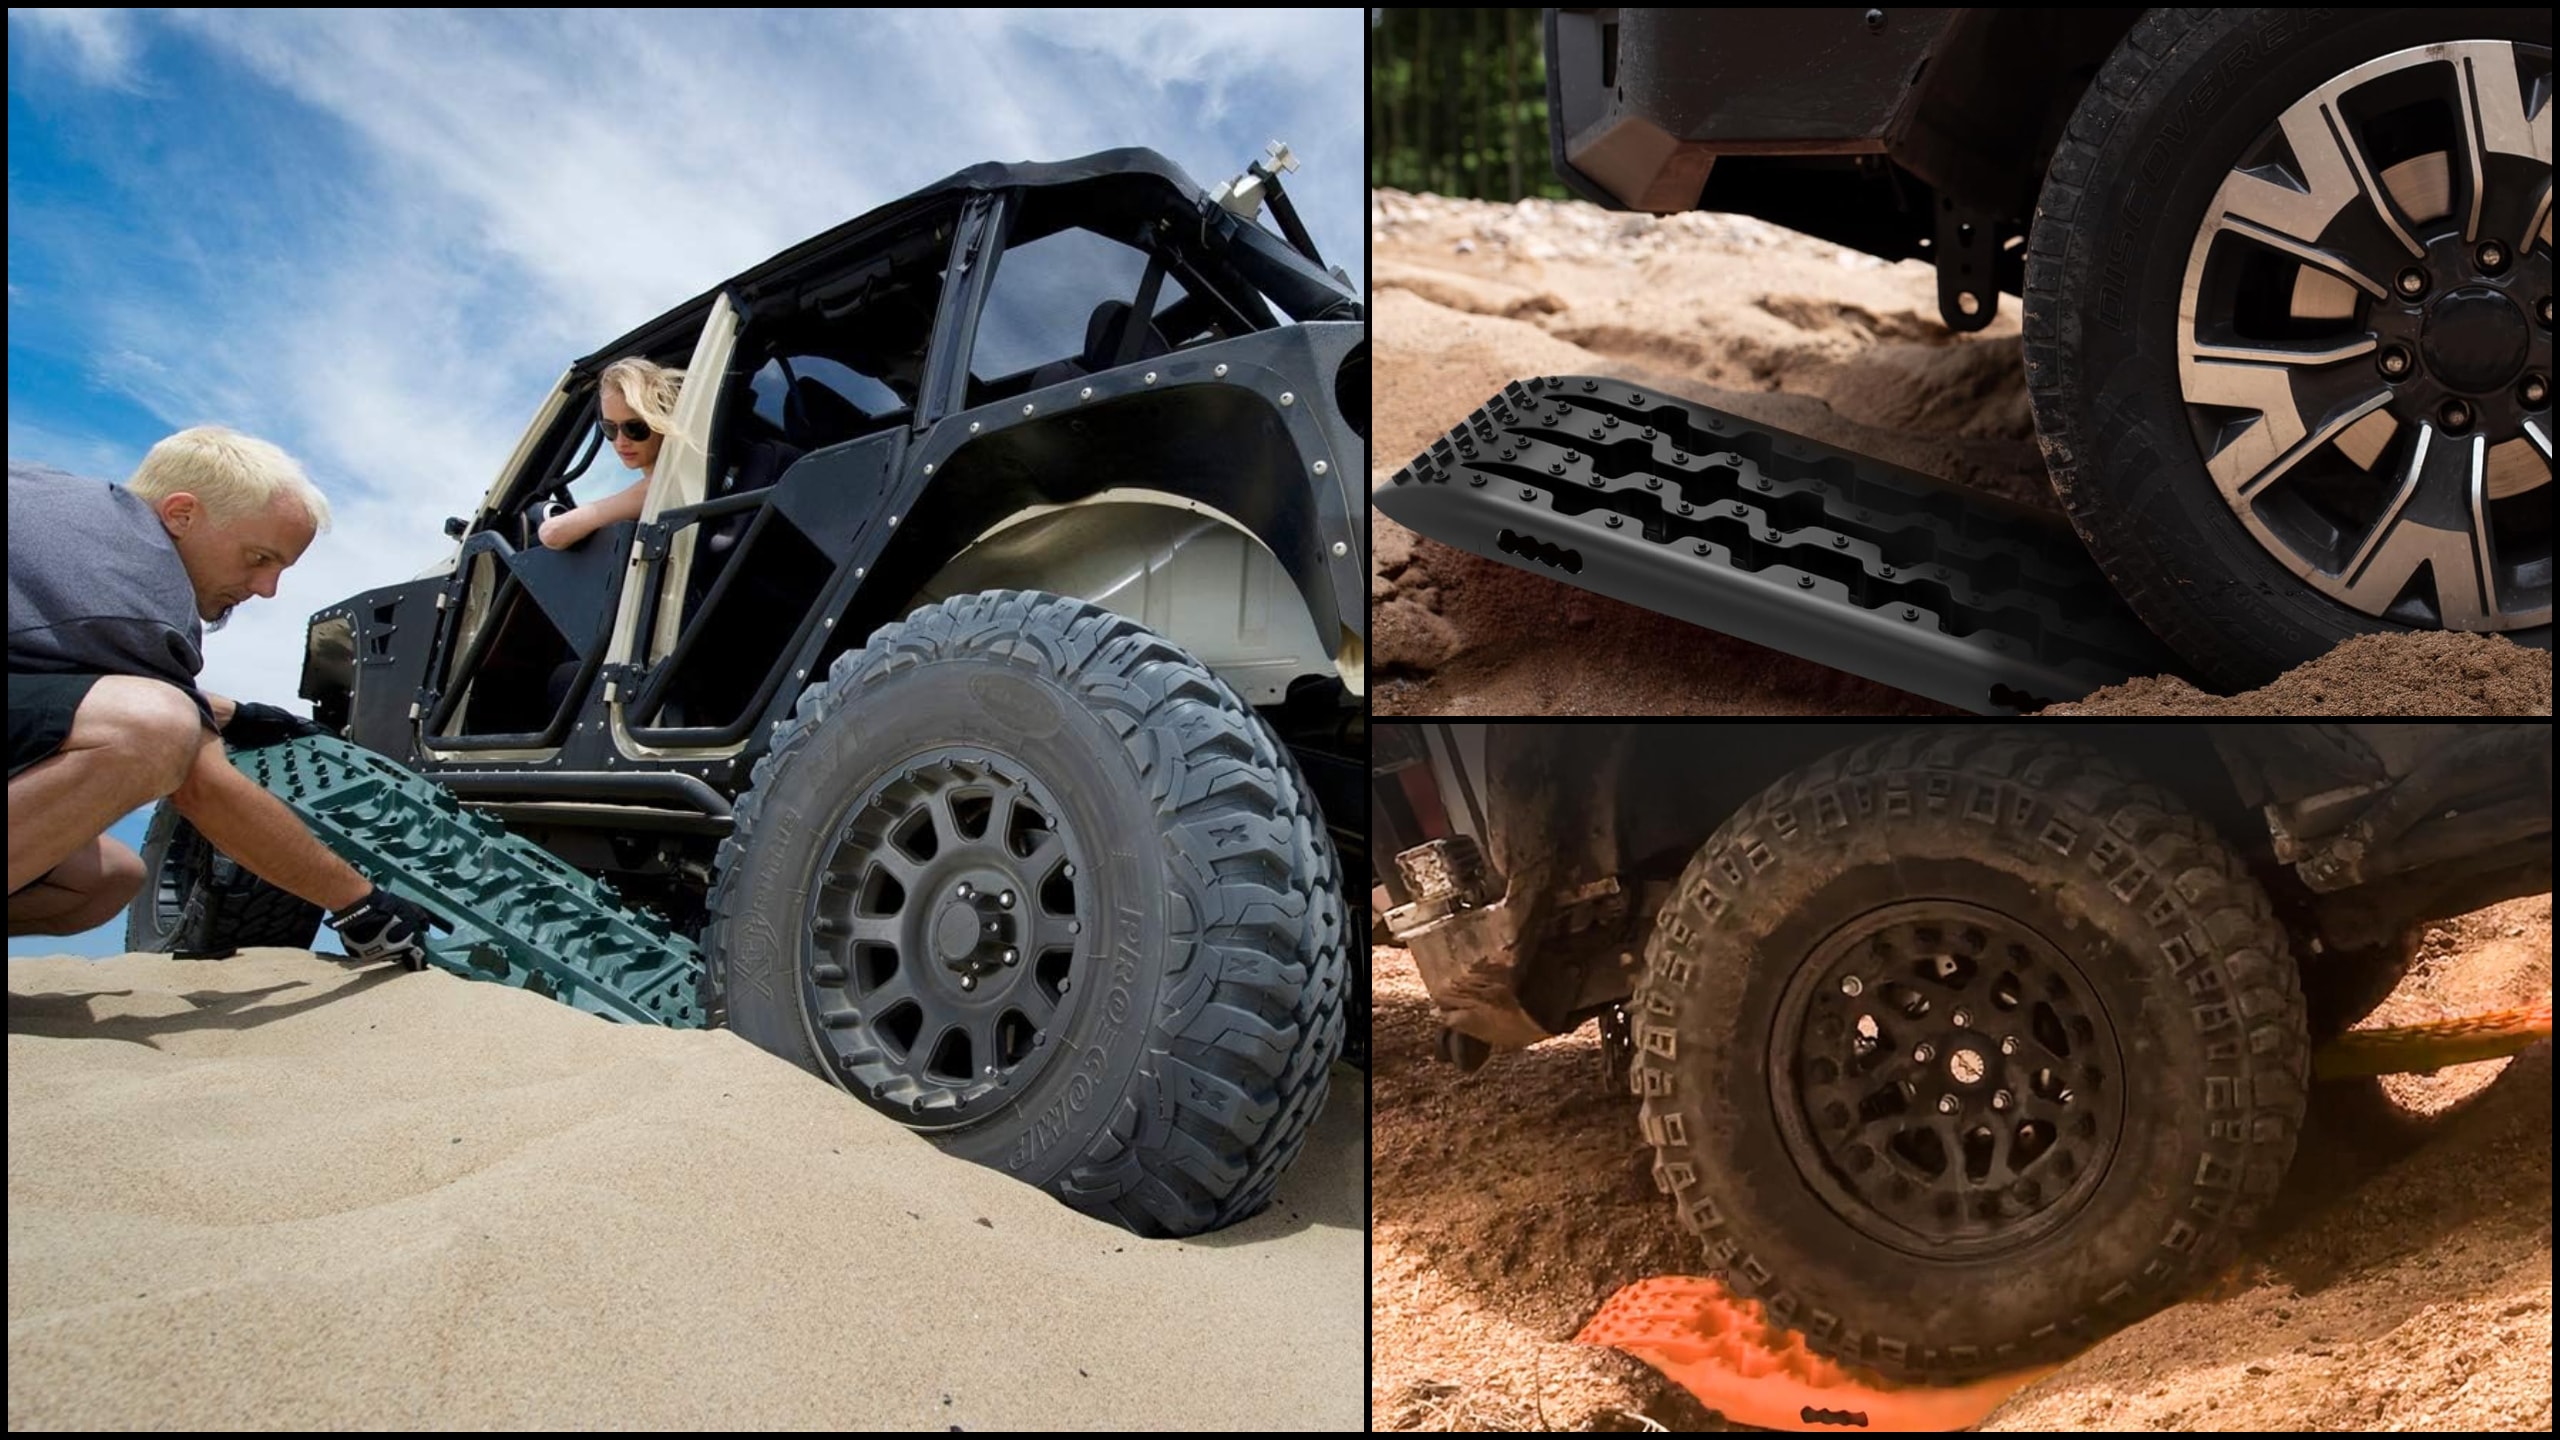 Tire Traction Mats Foldable, Portable Recovery Track Boards for Off Road  4X4